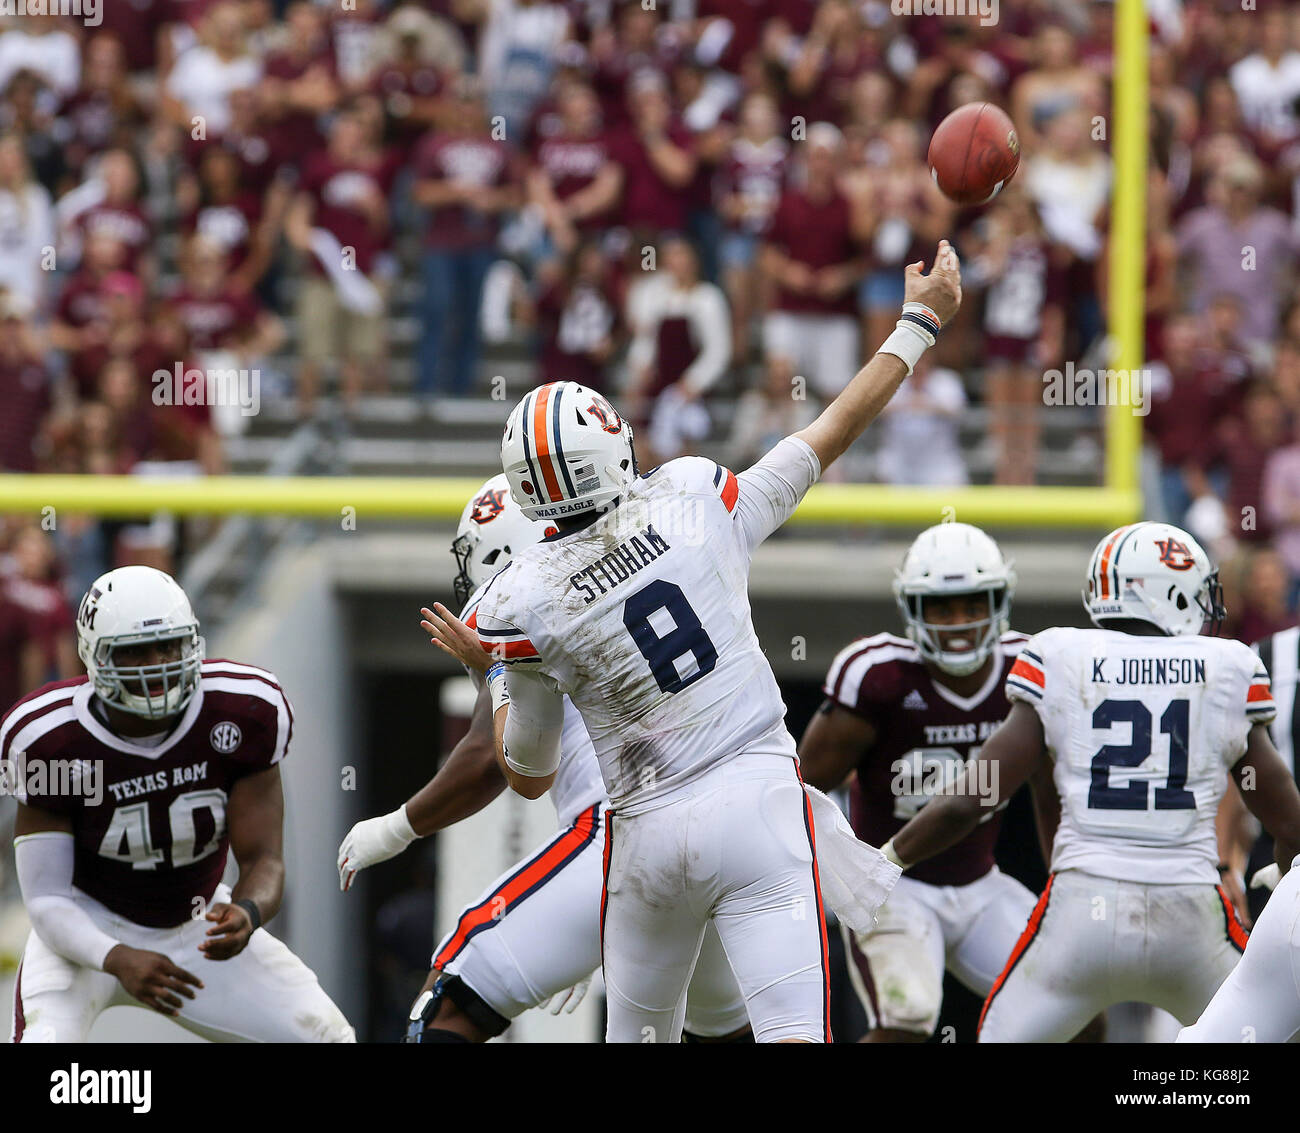 November 4, 2017: Auburn Tigers quarterback Jarrett Stidham (8) drops back to pass in the third quarter during the NCAA football game between the Auburn Tigers and the Texas A&M Aggies at Kyle Field in College Station, TX; John Glaser/CSM. Stock Photo